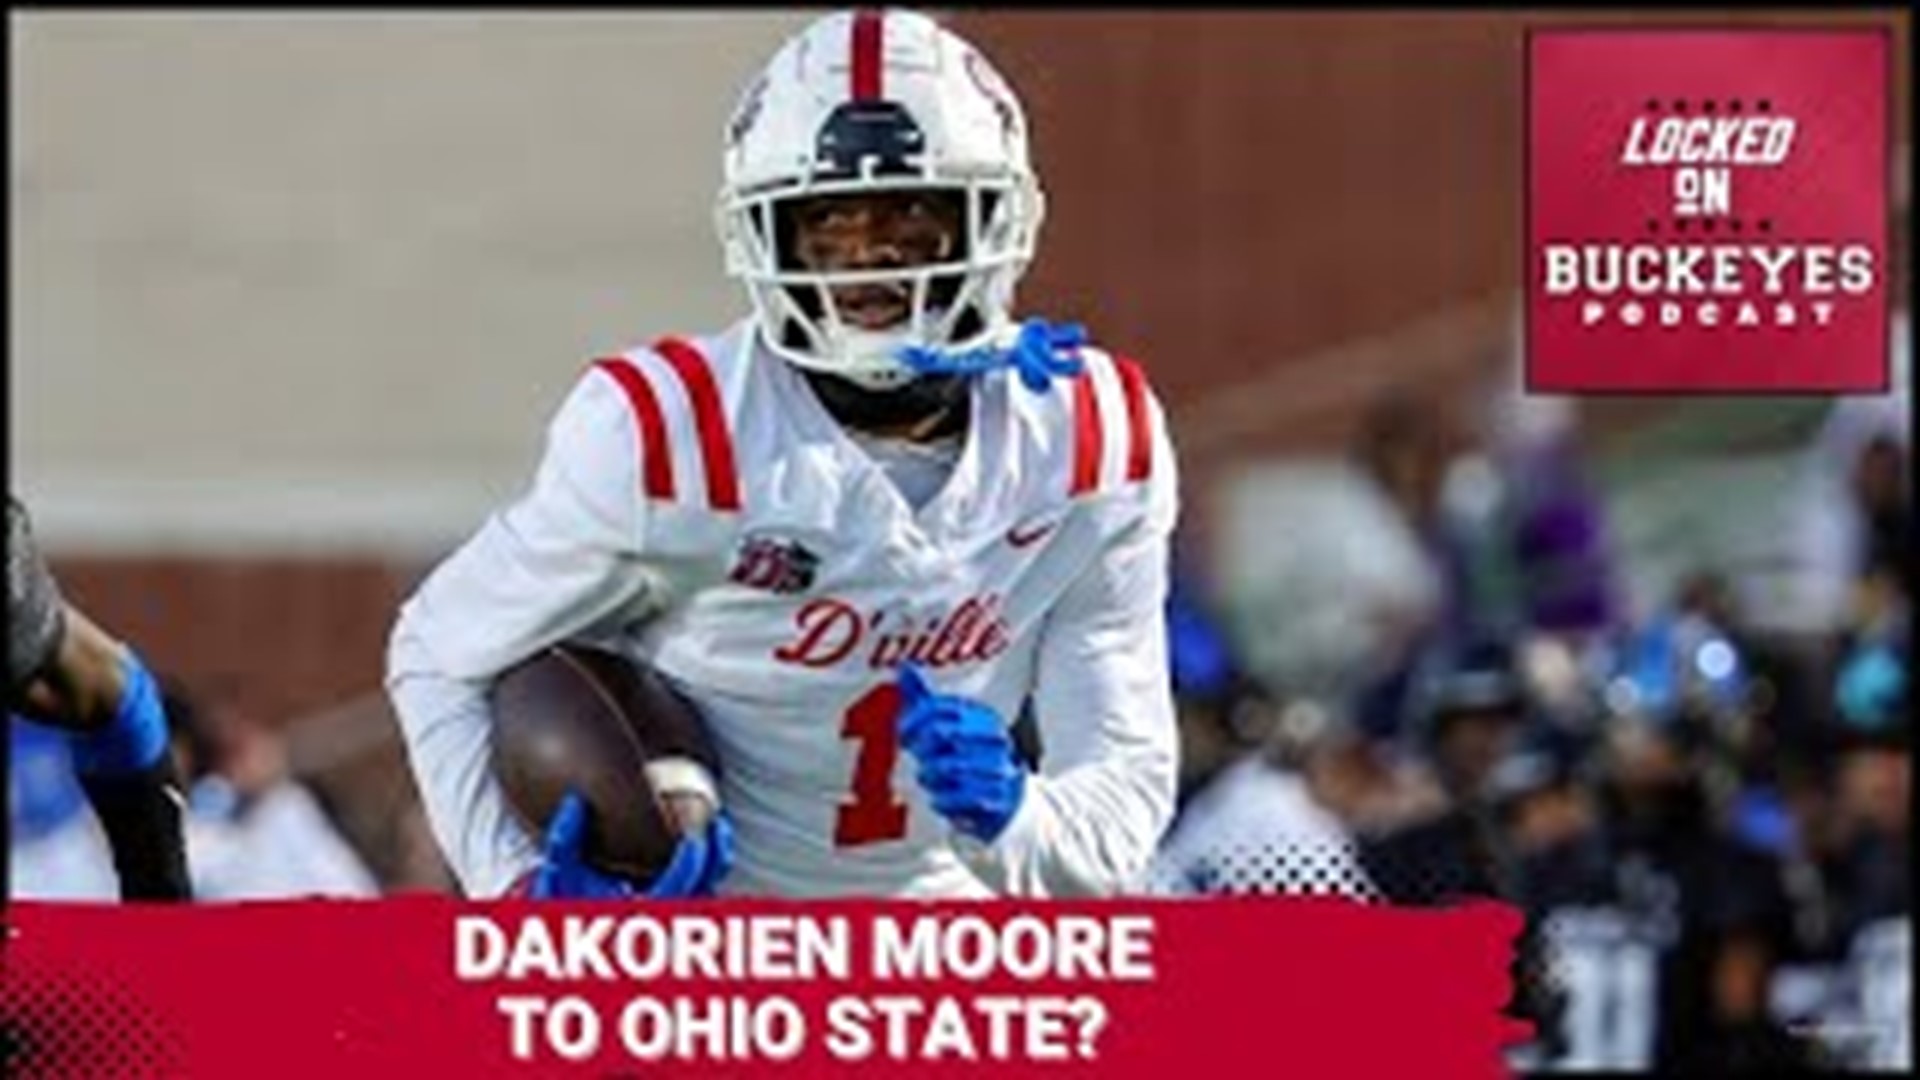 Ohio State's spring game is going to be full of recruits the Buckeyes are trying to lure to Columbus. One recruit who will be in attendance is Dakorien Moore.